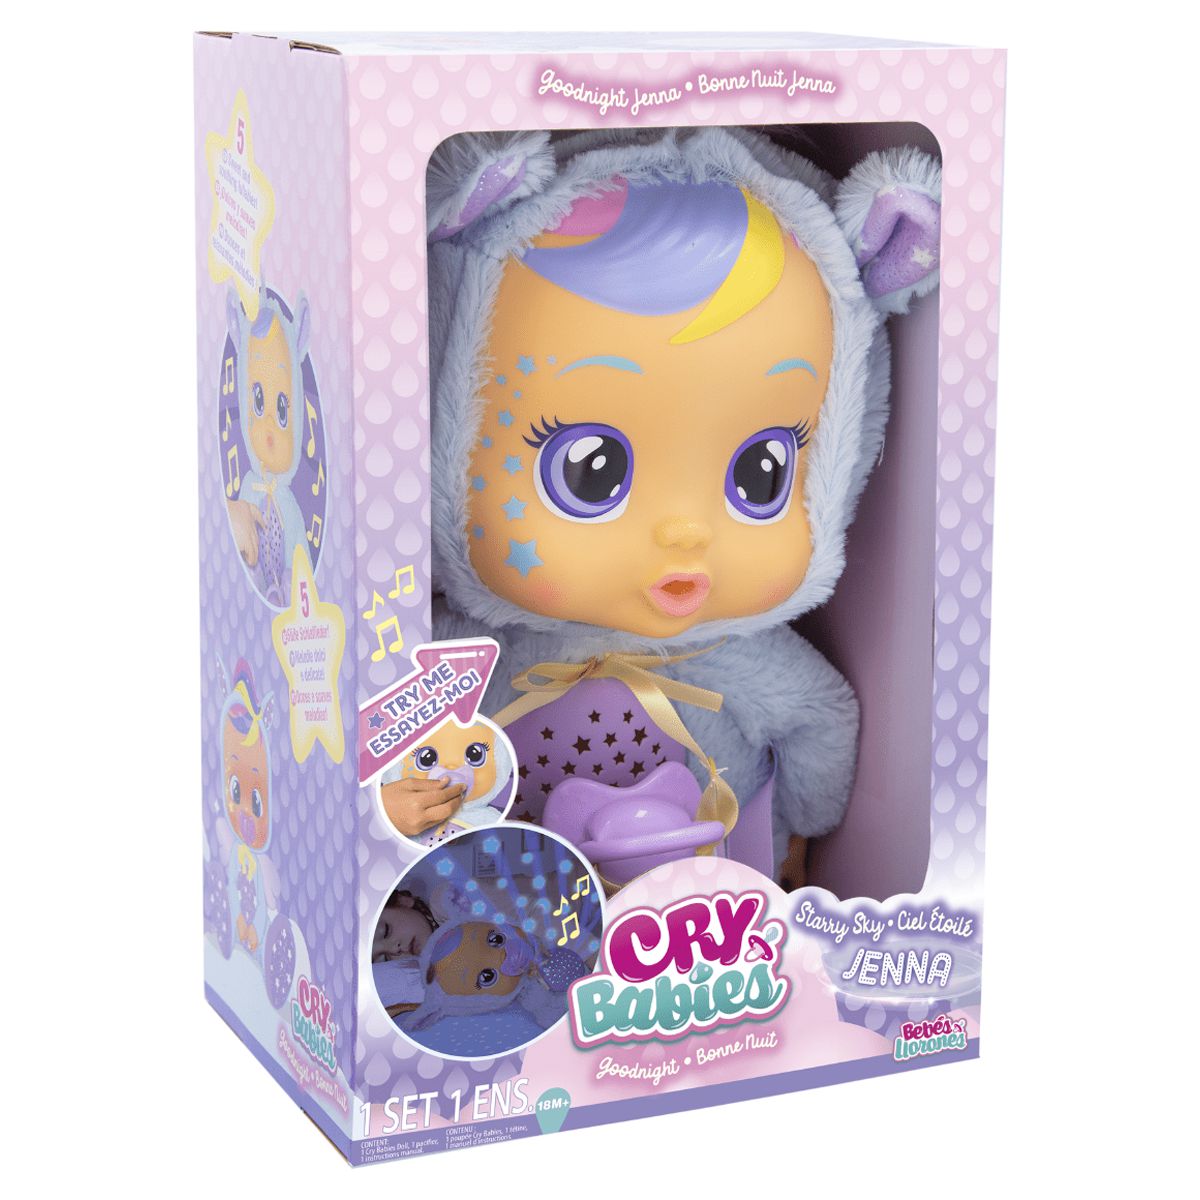 Cry Babies Goodnight Starry Sky Jenna 12 inch Doll with Starry Sky Projection! - image 9 of 10